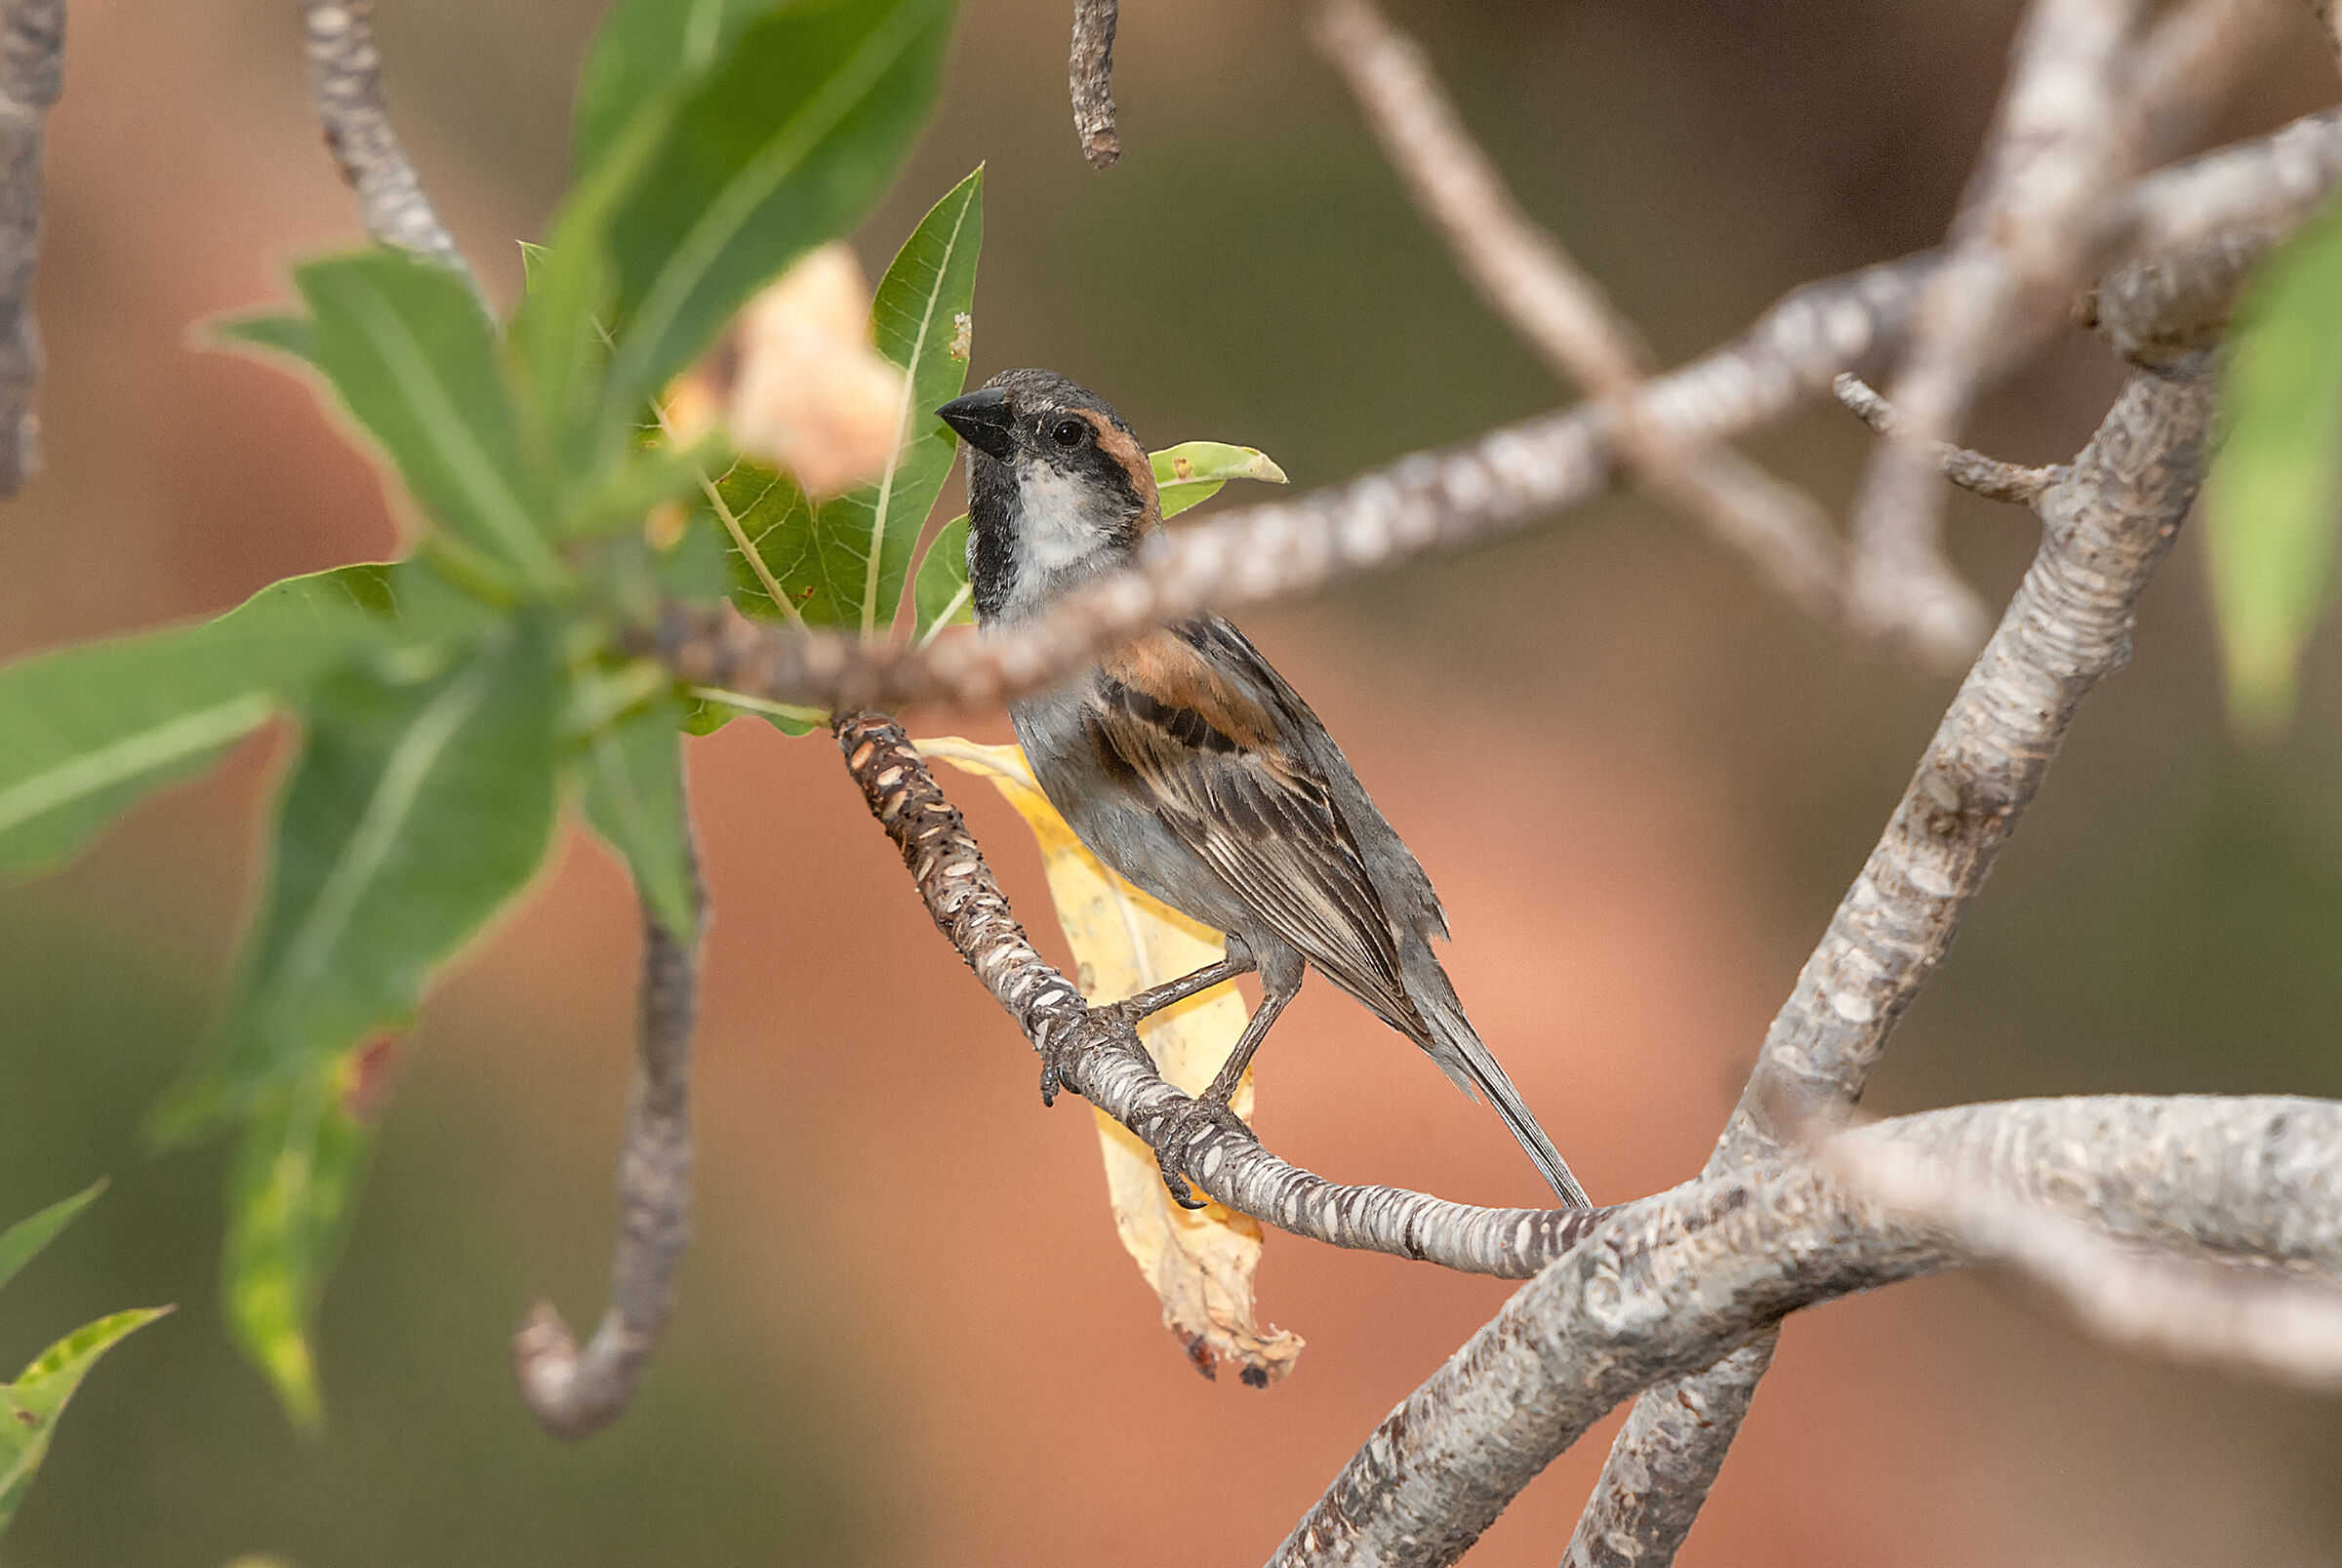  Island sparrow endemic to Socotra ...